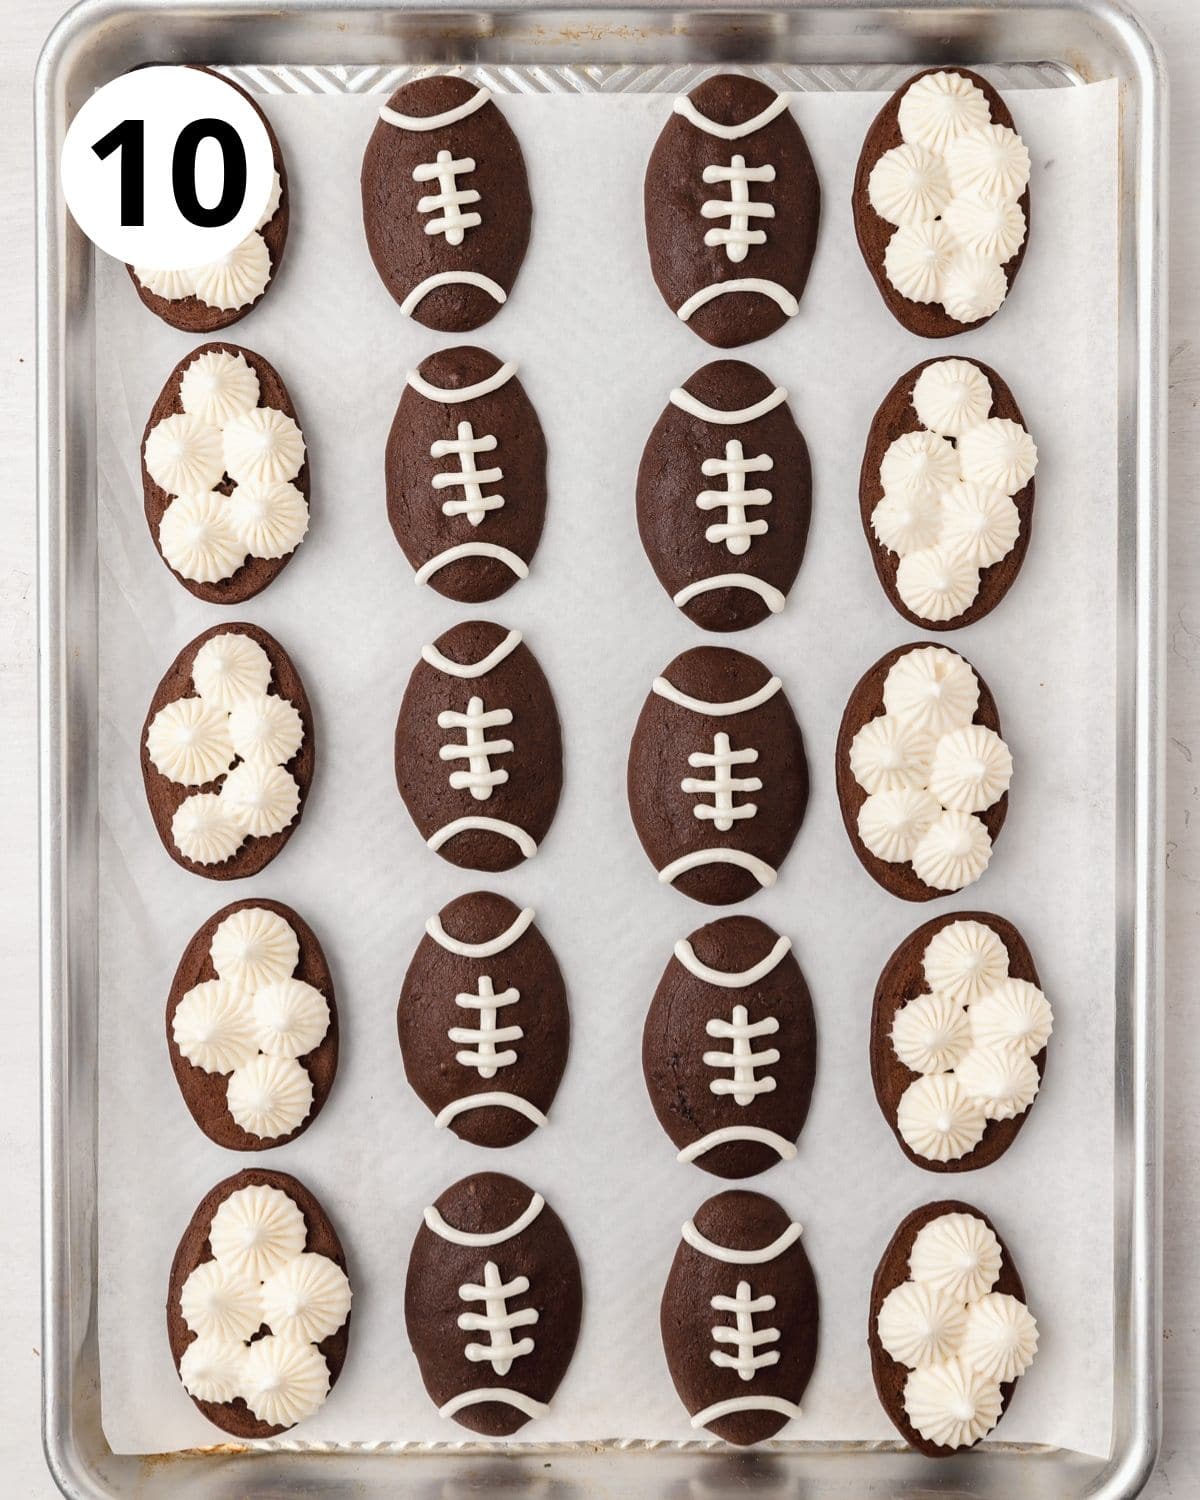 piping marshmallow buttercream into chocolate football whoopie pies